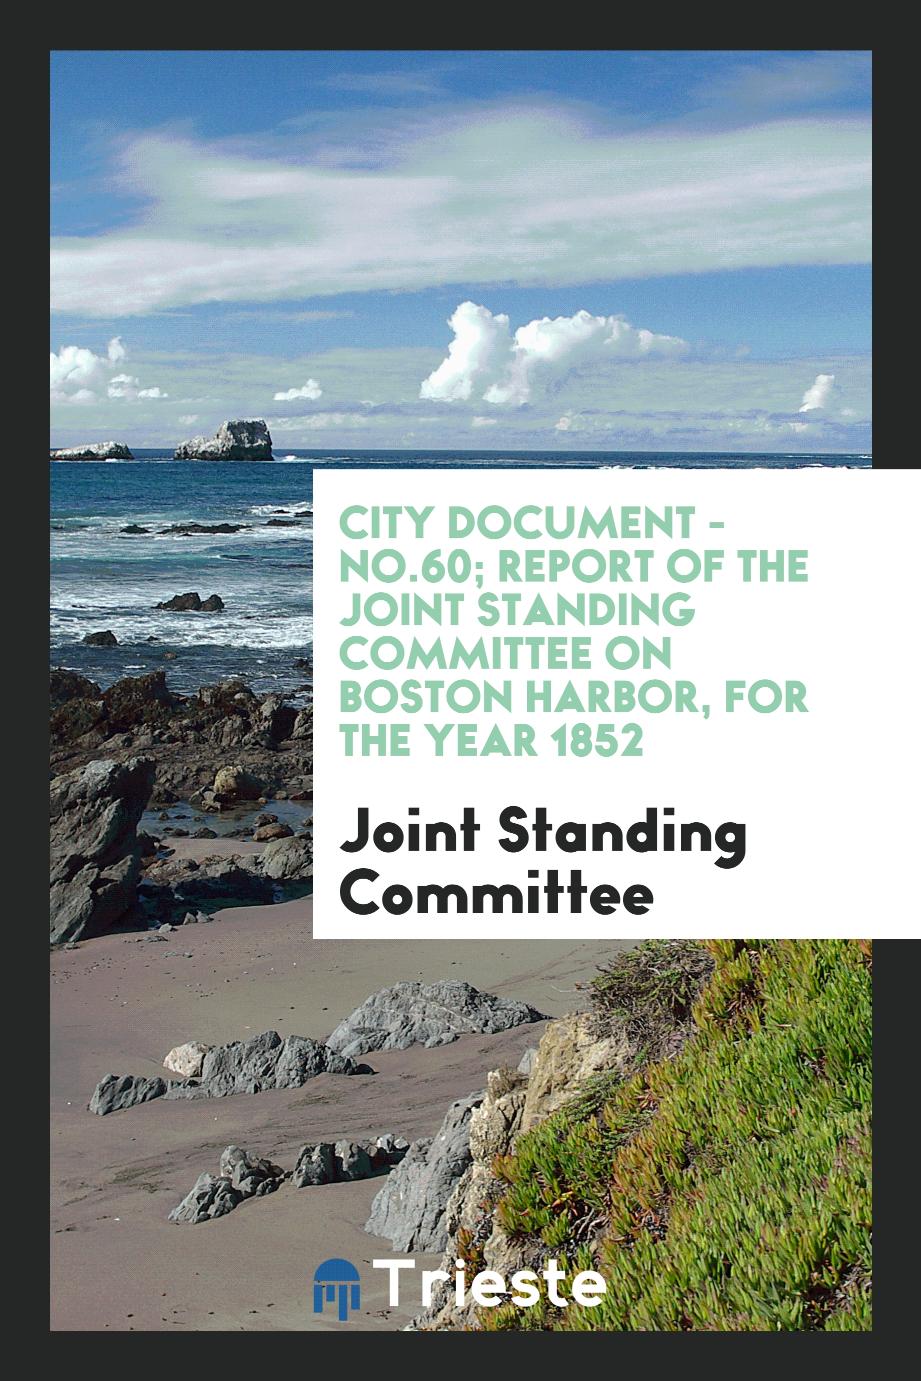 City Document - No.60; Report of the Joint Standing Committee on Boston Harbor, for the Year 1852